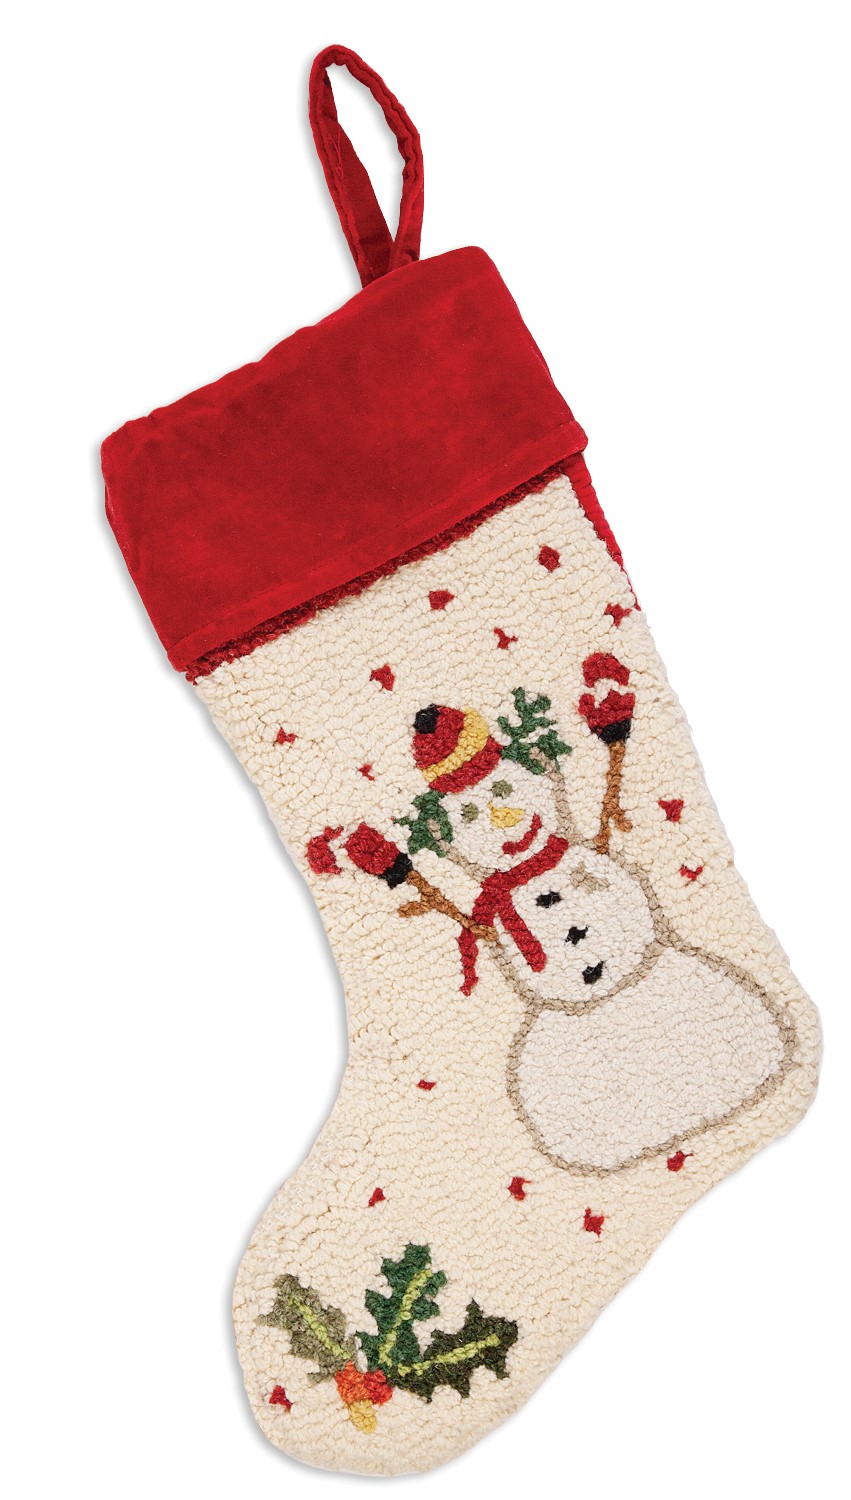 Chandler 4 Corners hand hooked wool holiday stocking